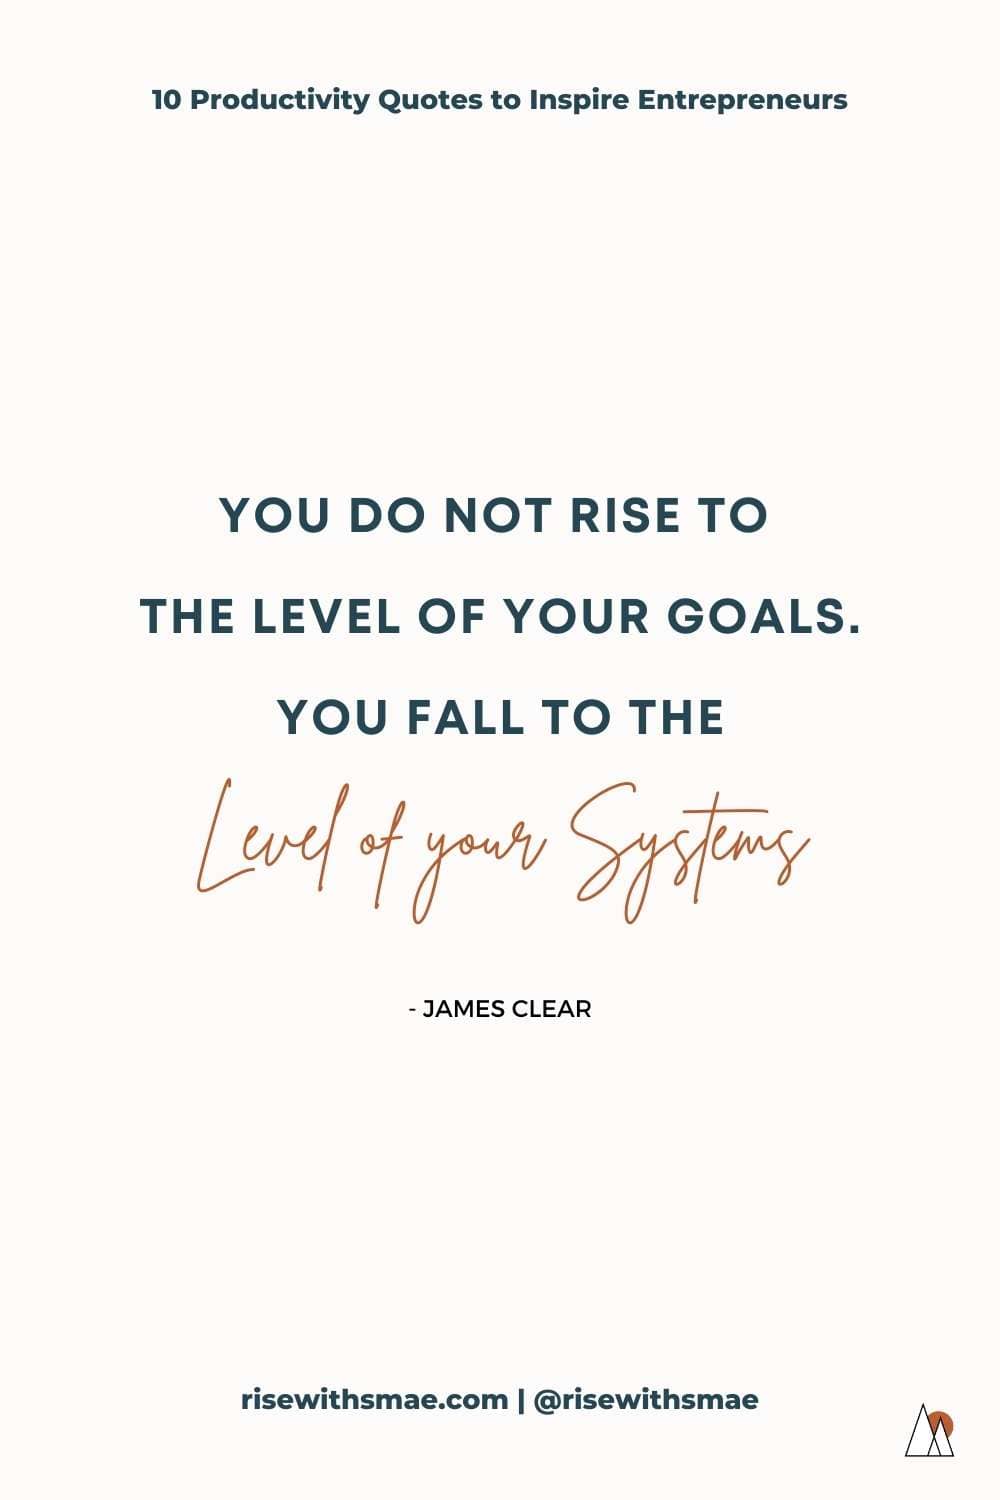 PRODUCTIVITY QUOTES FOR ENTREPRENEURS - James Clear | Pin Image!